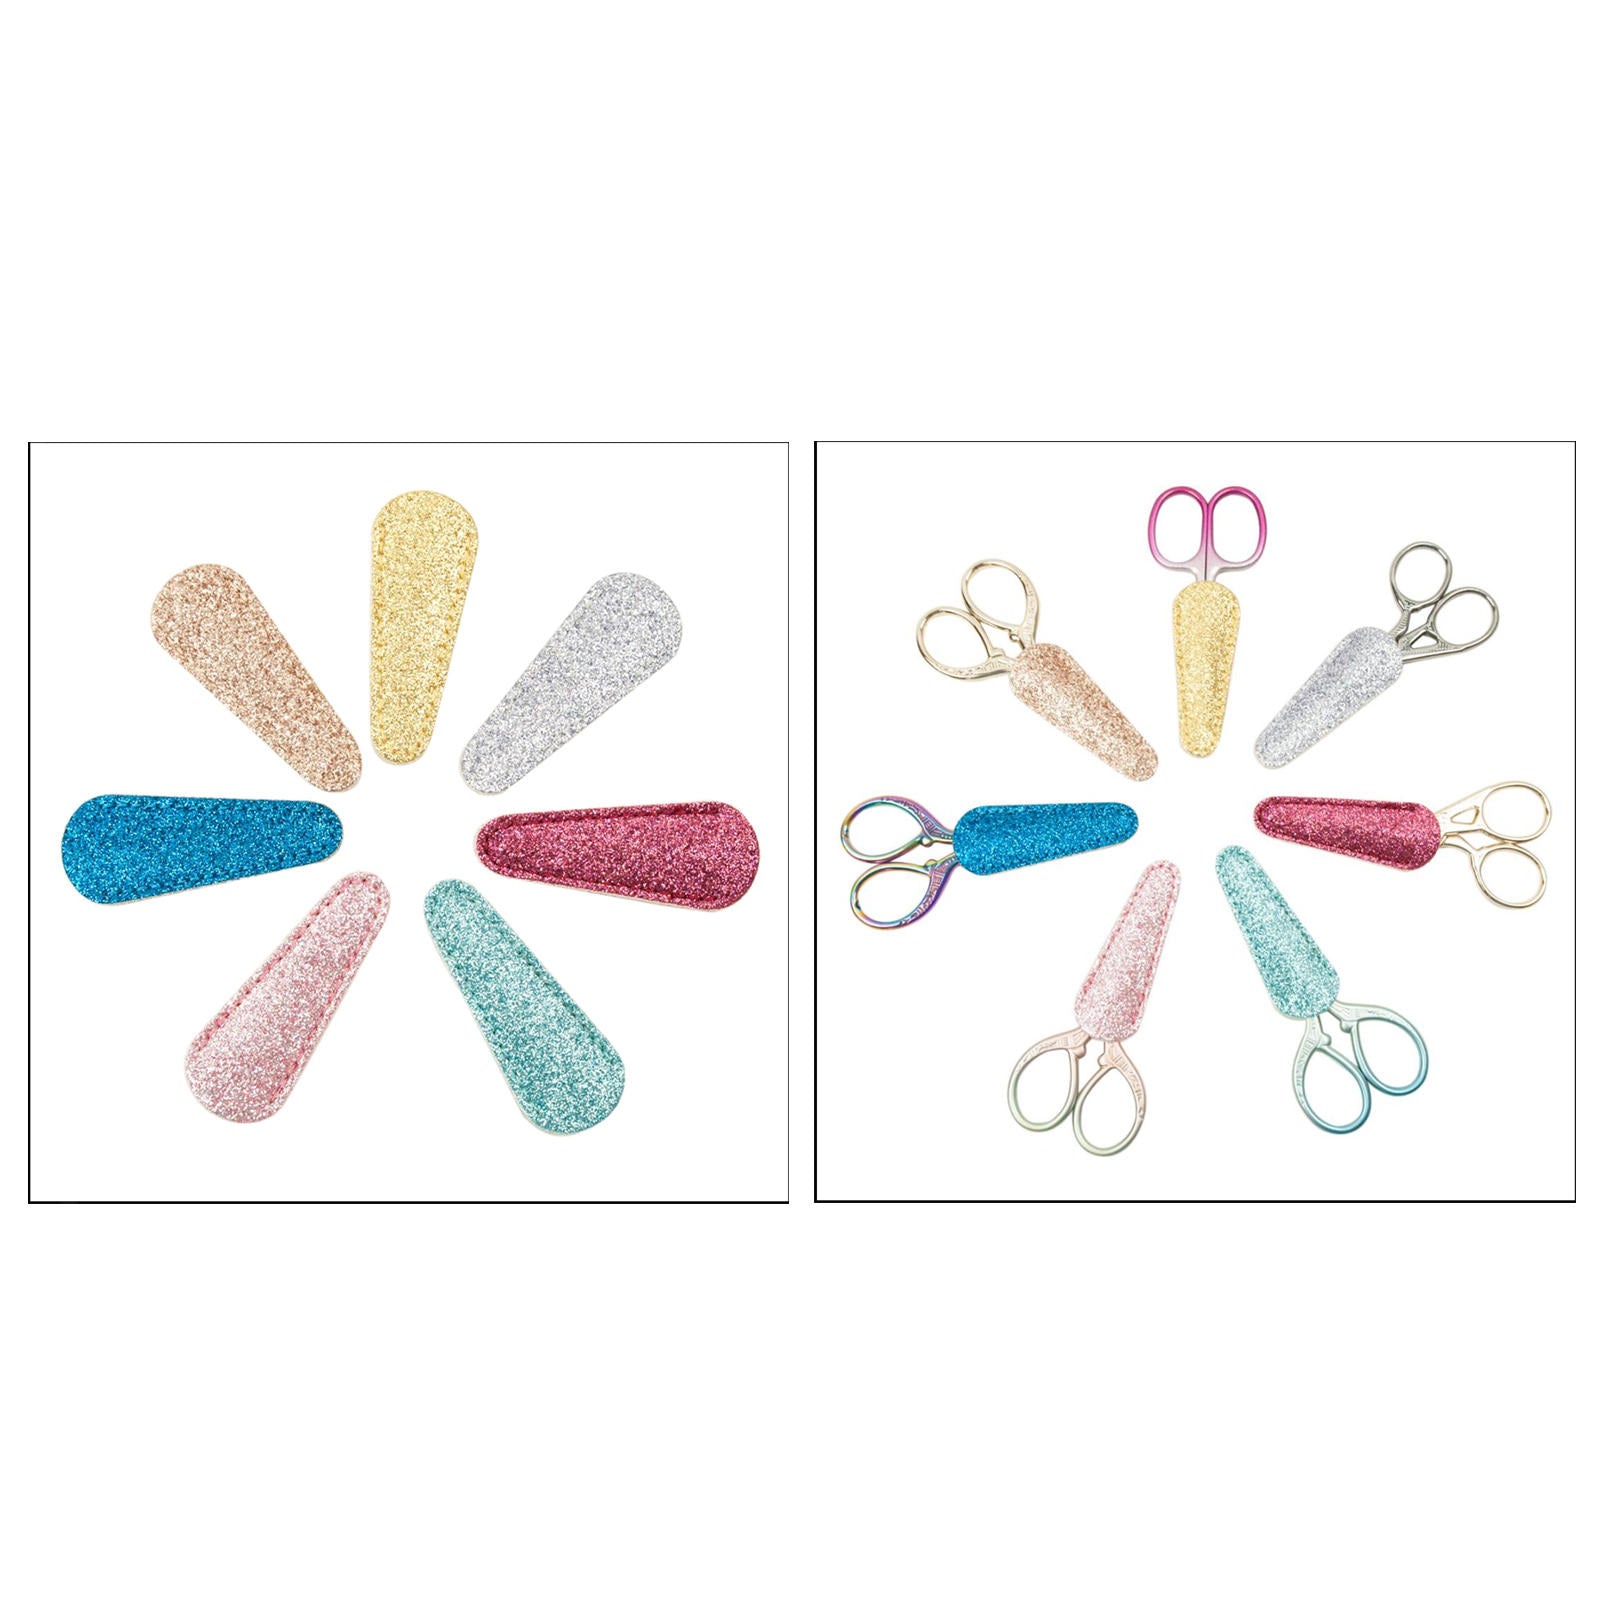 7x Embroidery Scissors Sheath Covers Sewing Protector Cover Holder Bags Case